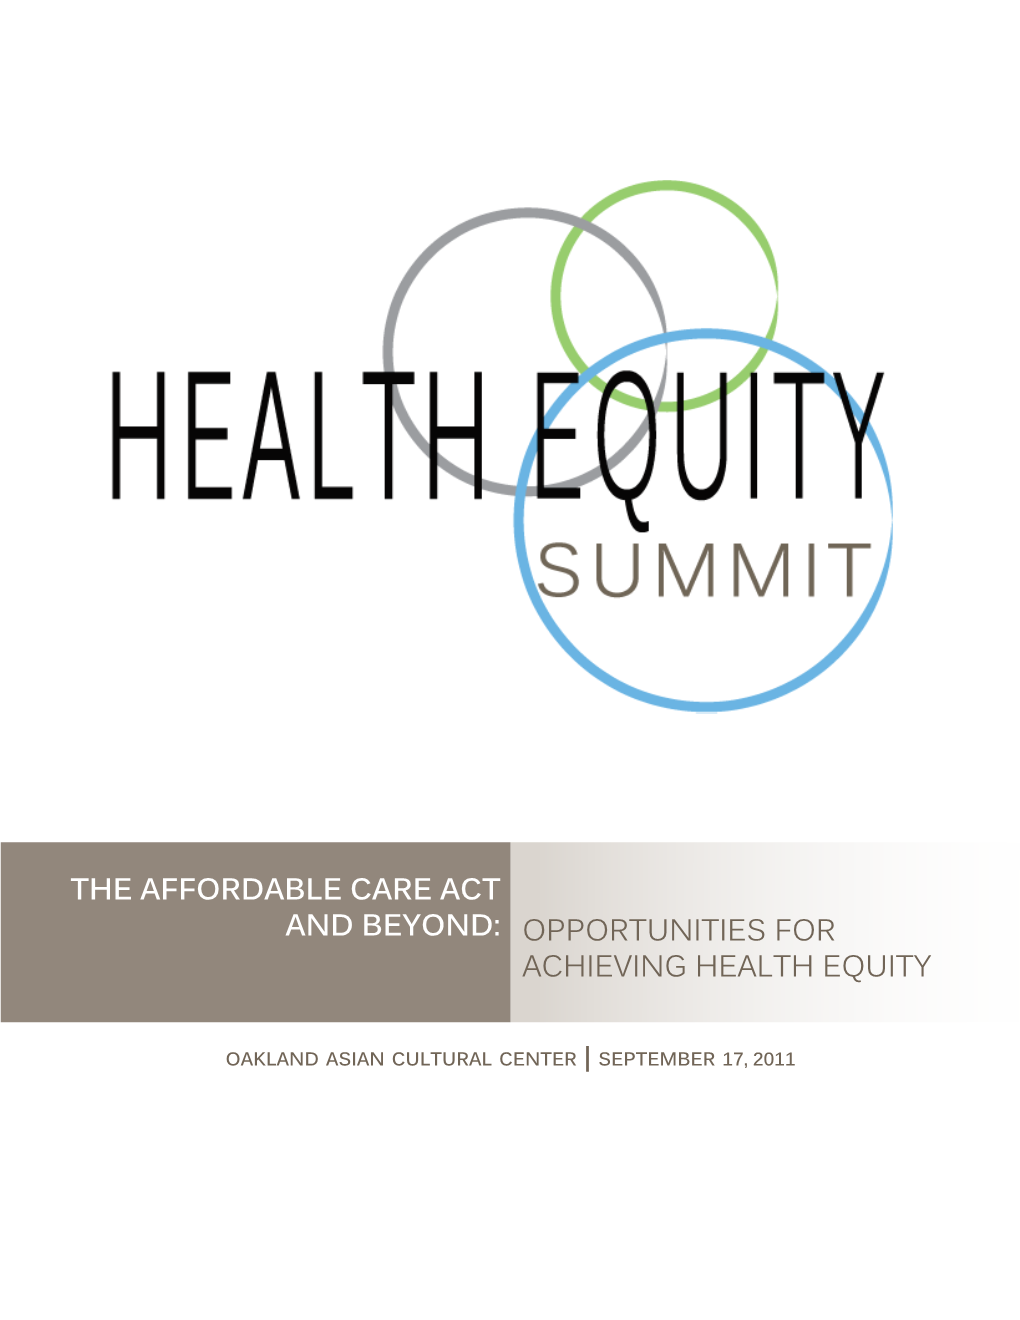 Opportunities for Achieving Health Equity